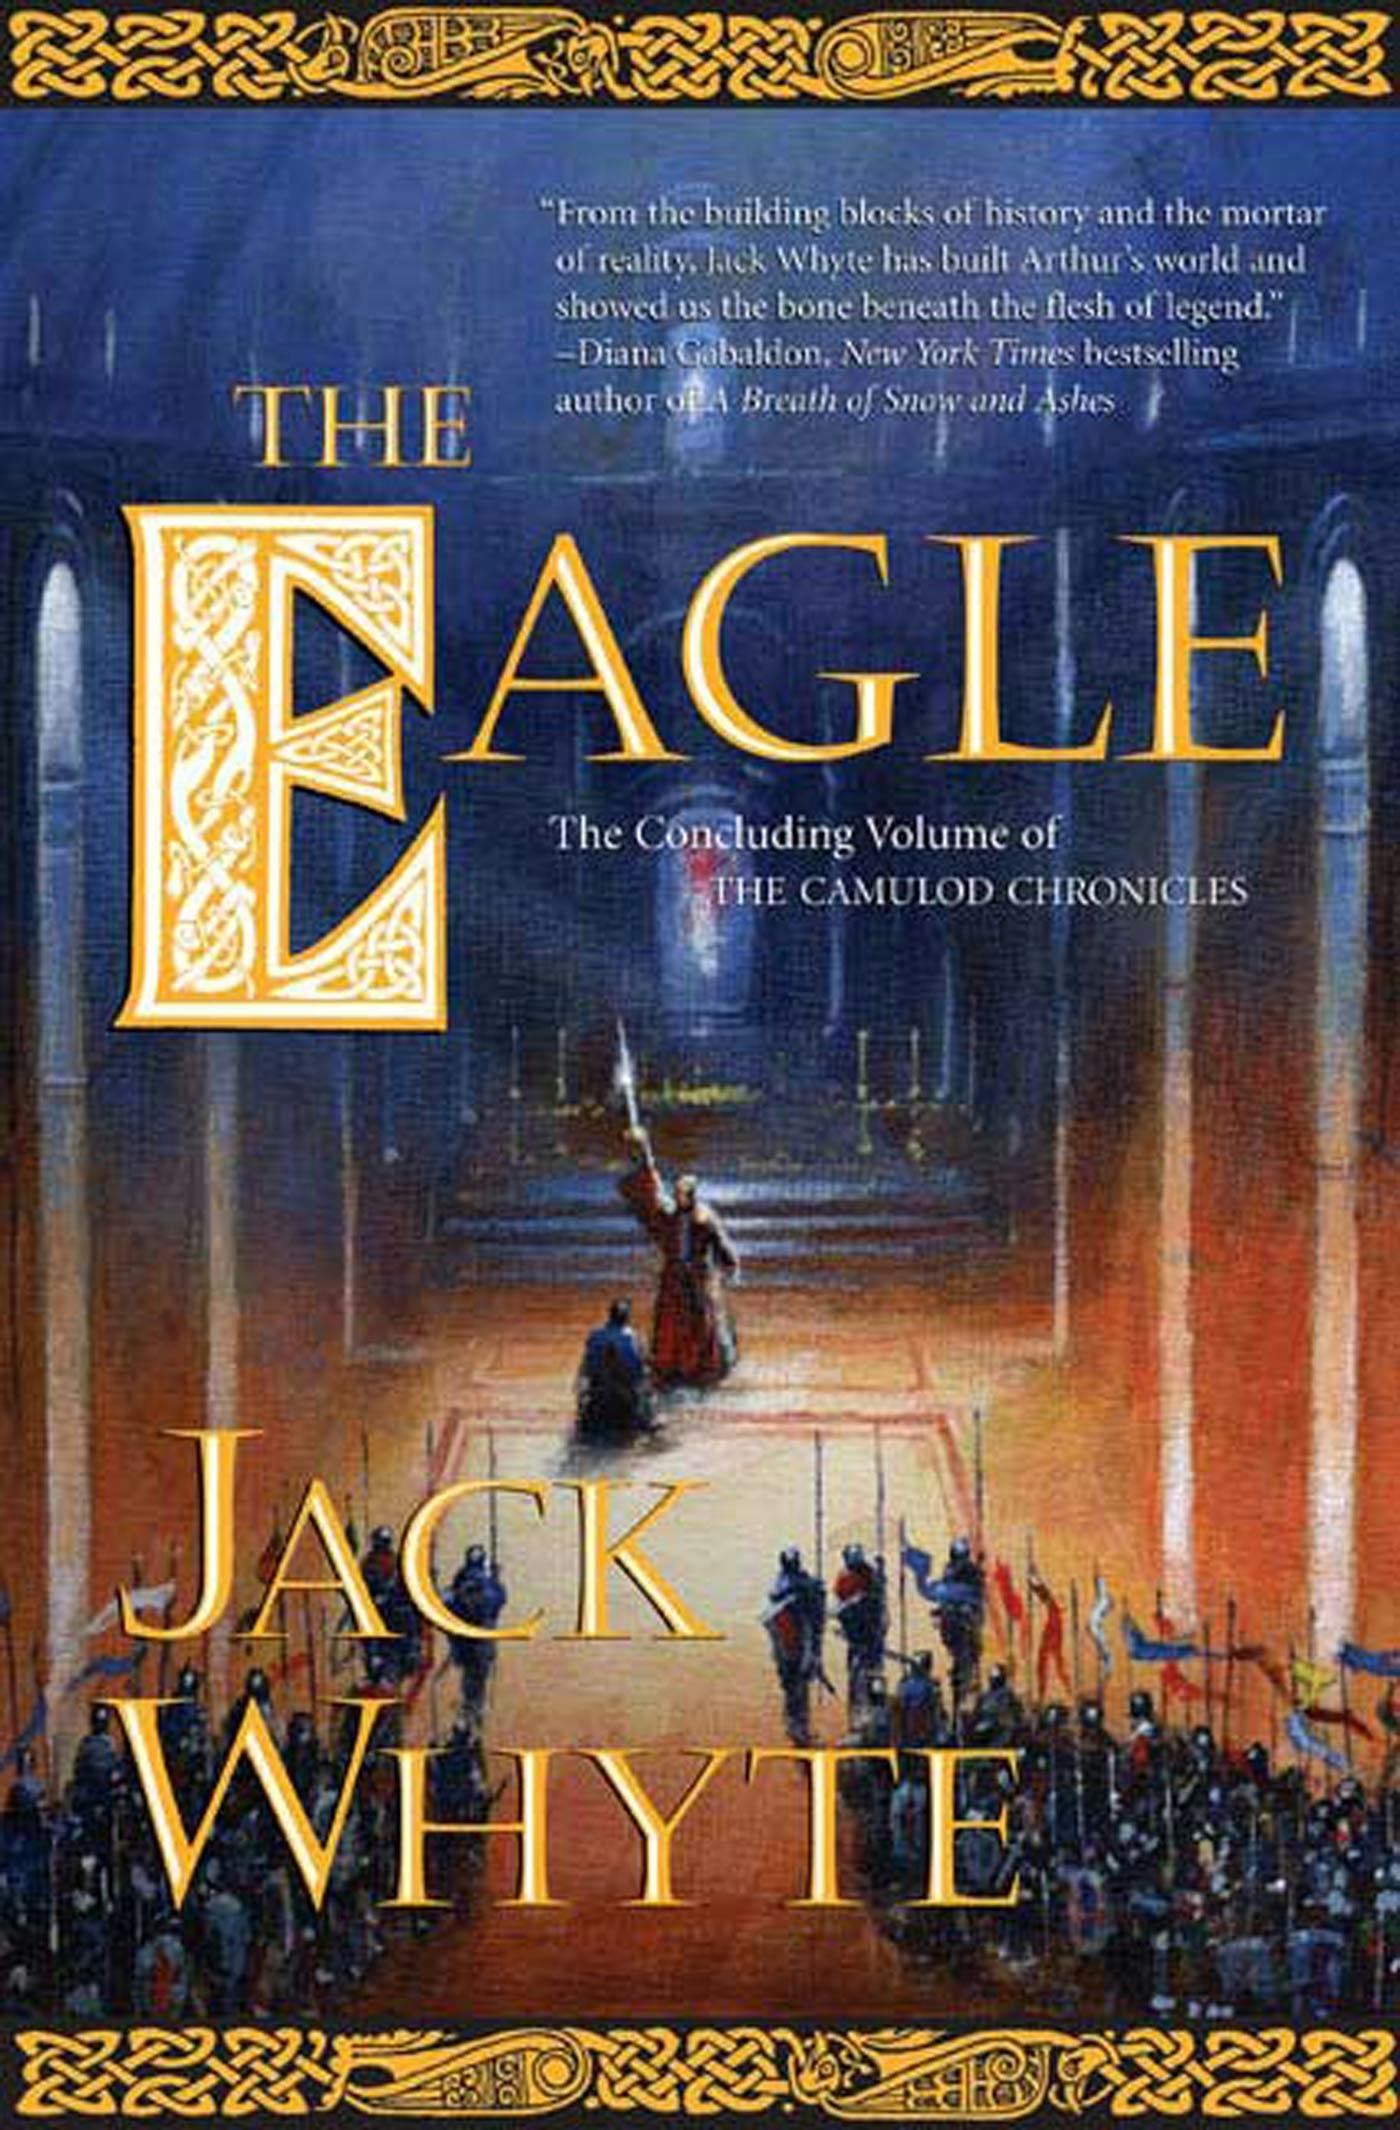 Cover for the book titled as: The Eagle